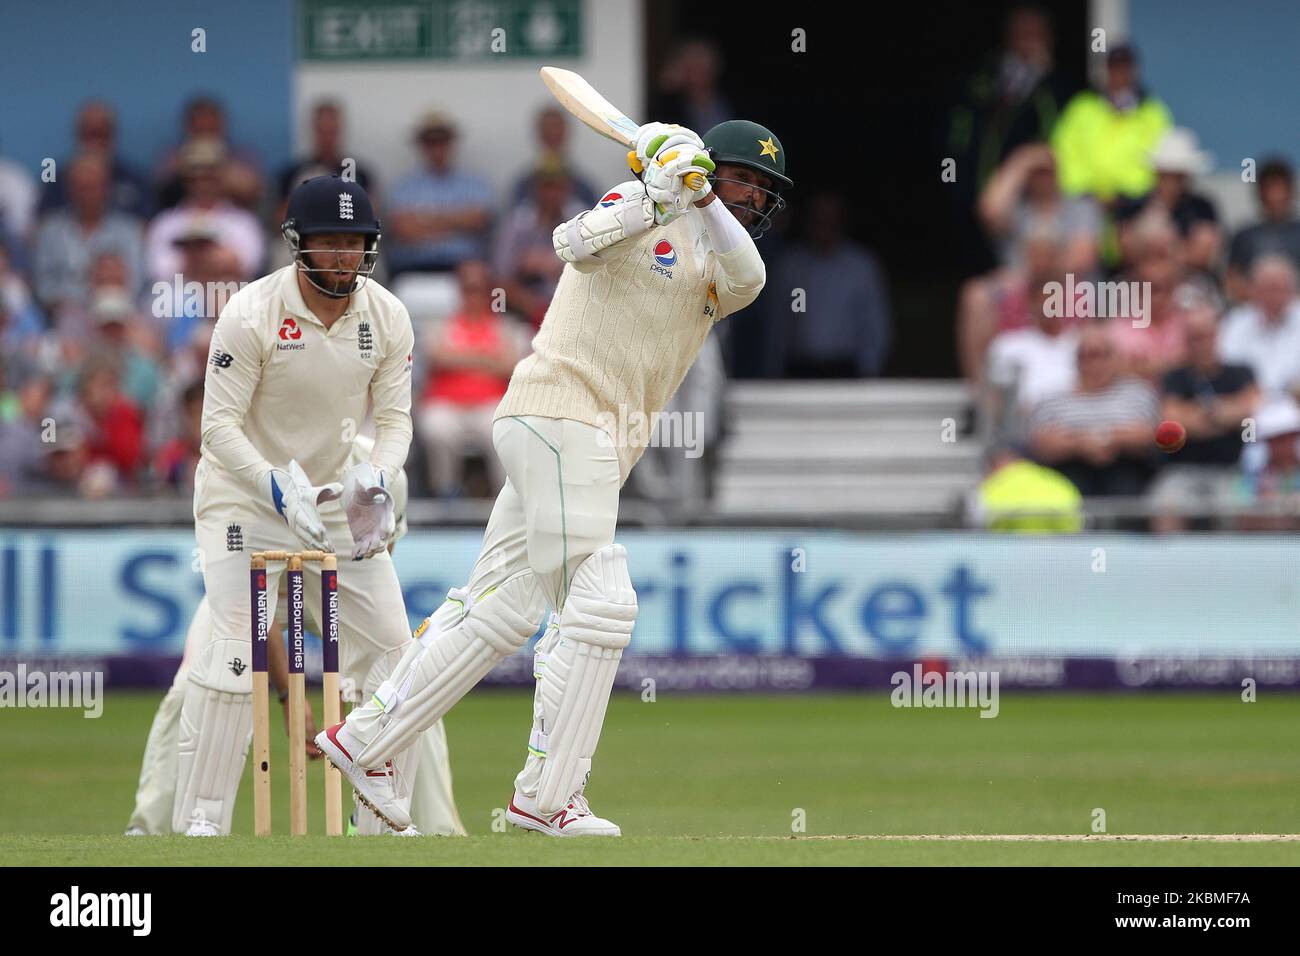 Mohammed Amir of Pakistan batting during the third day of the Second Nat West Test match between England and Pakistan at Headingley Cricket Ground, Leeds on Sunday 3rd June 2018. (Photo by Mark Fletcher/MI News/NurPhoto) Stock Photo